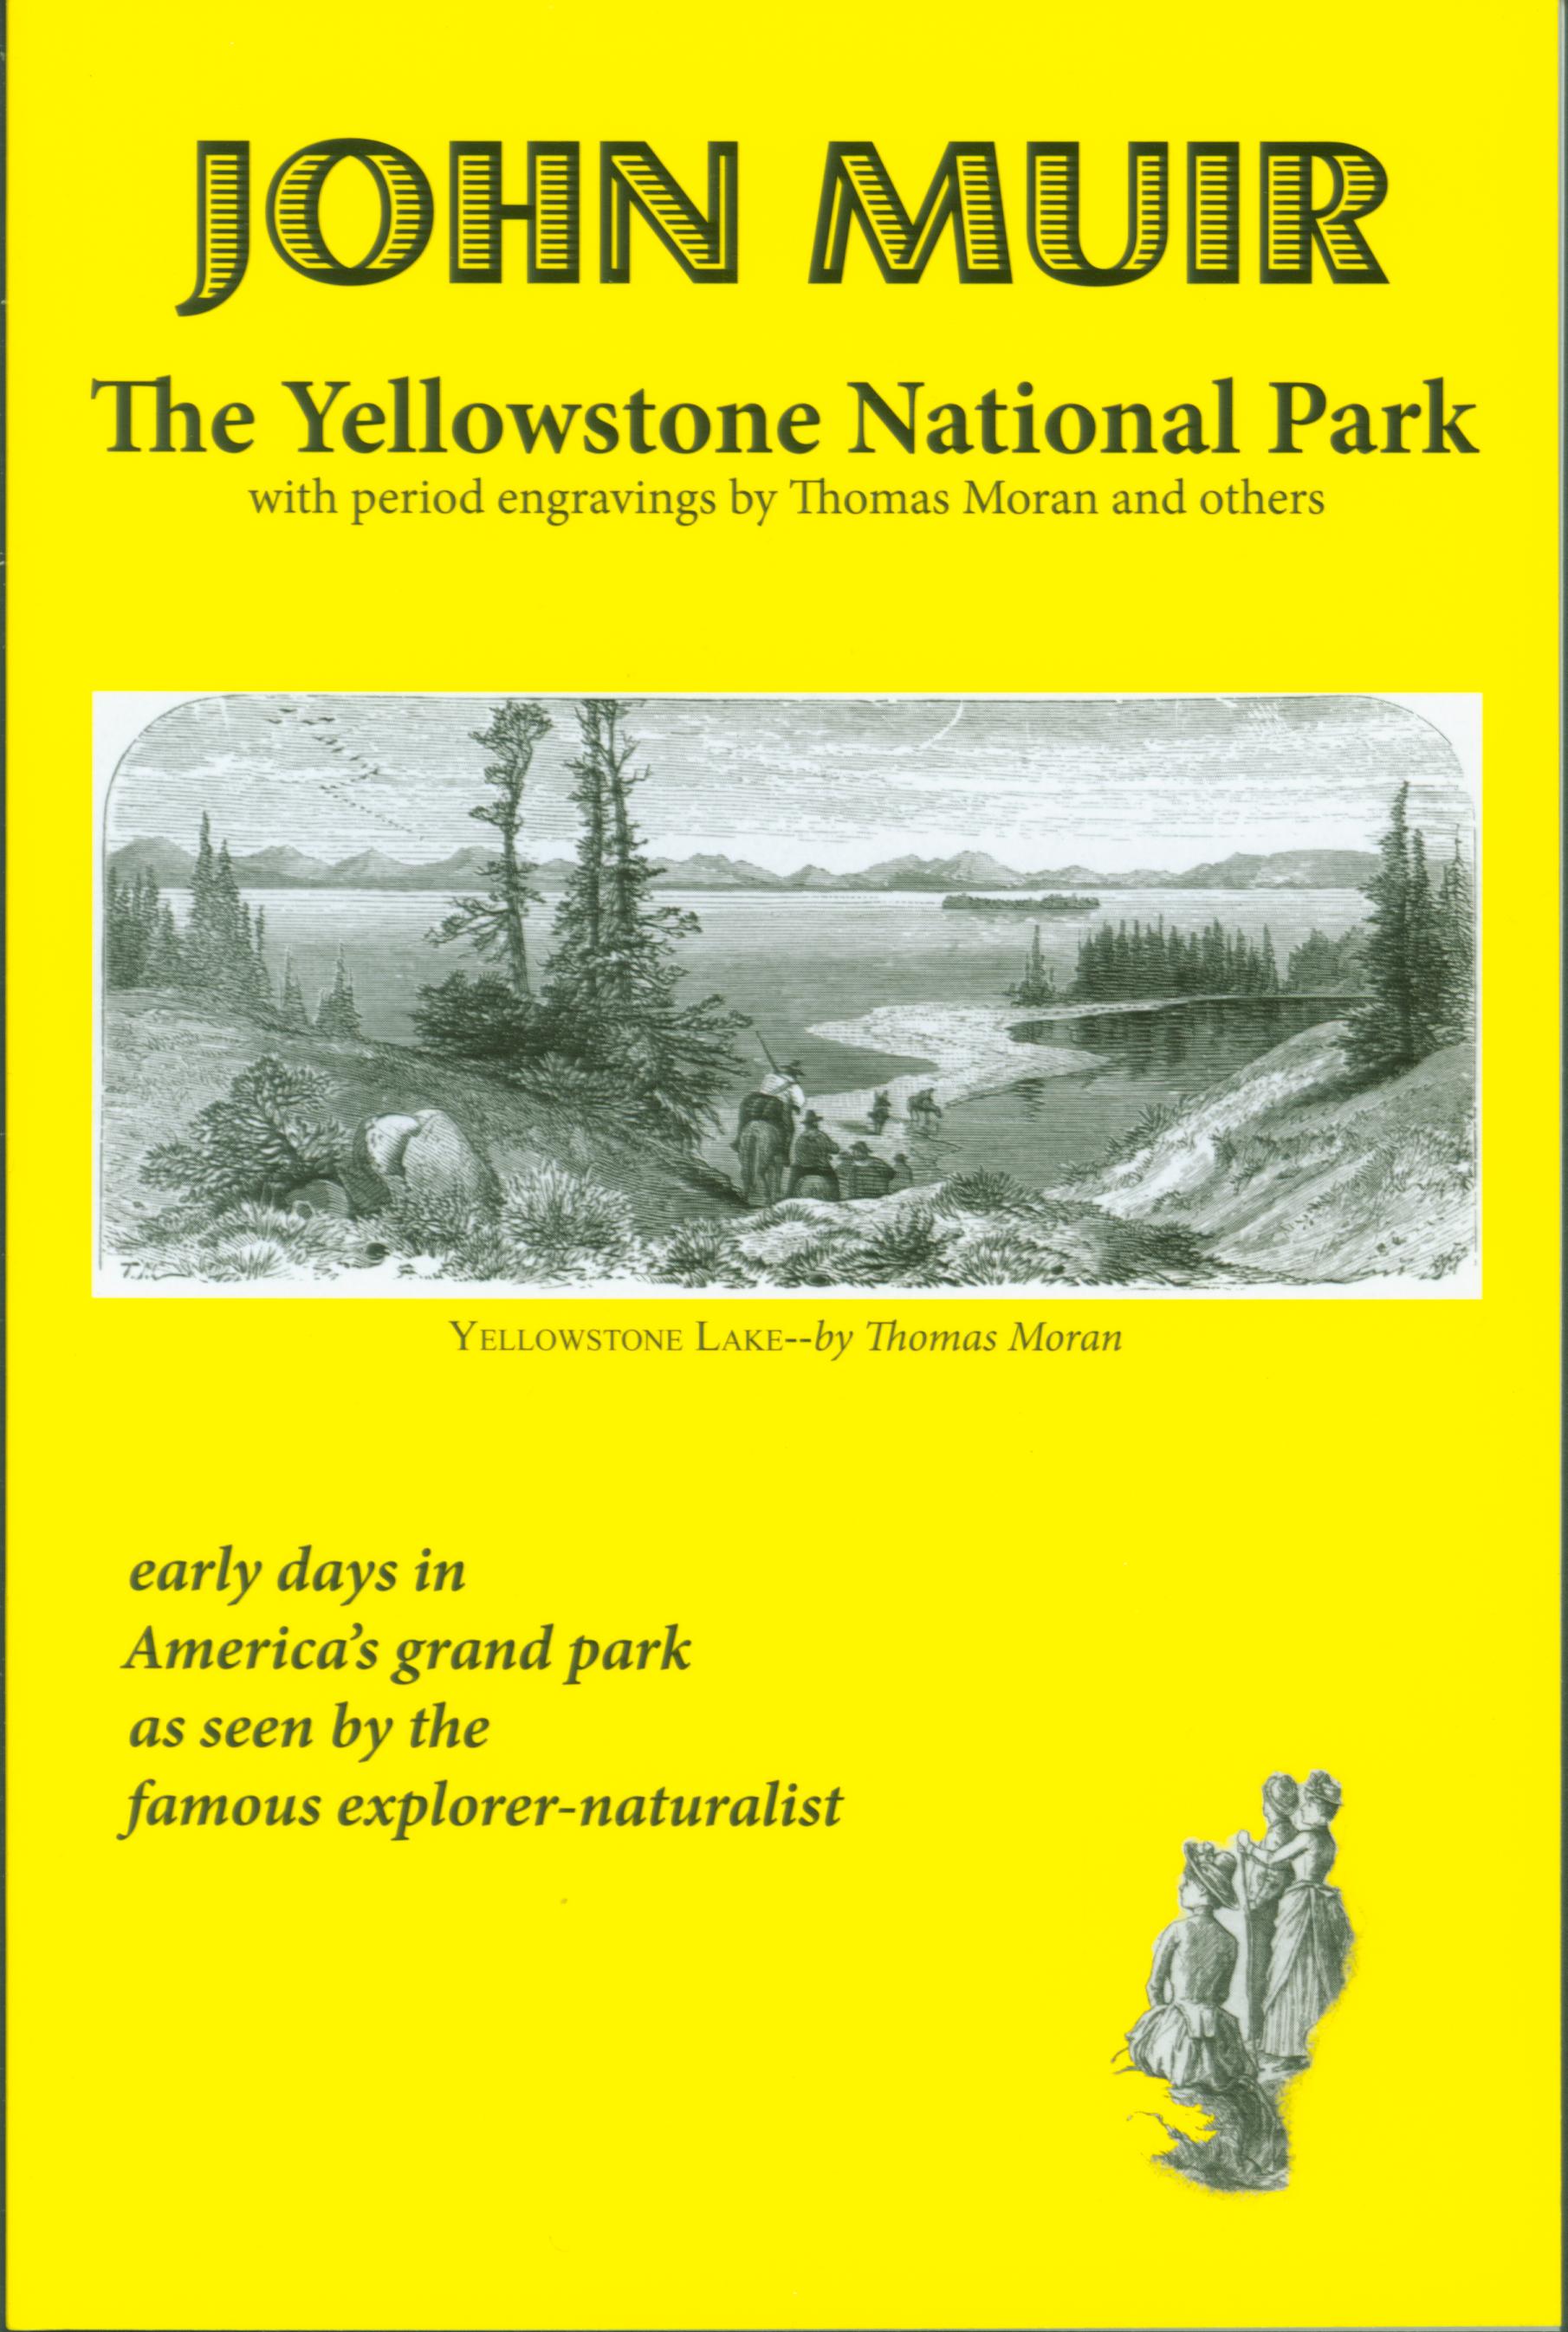 The Yellowstone National Park. vists0101 front cover mini